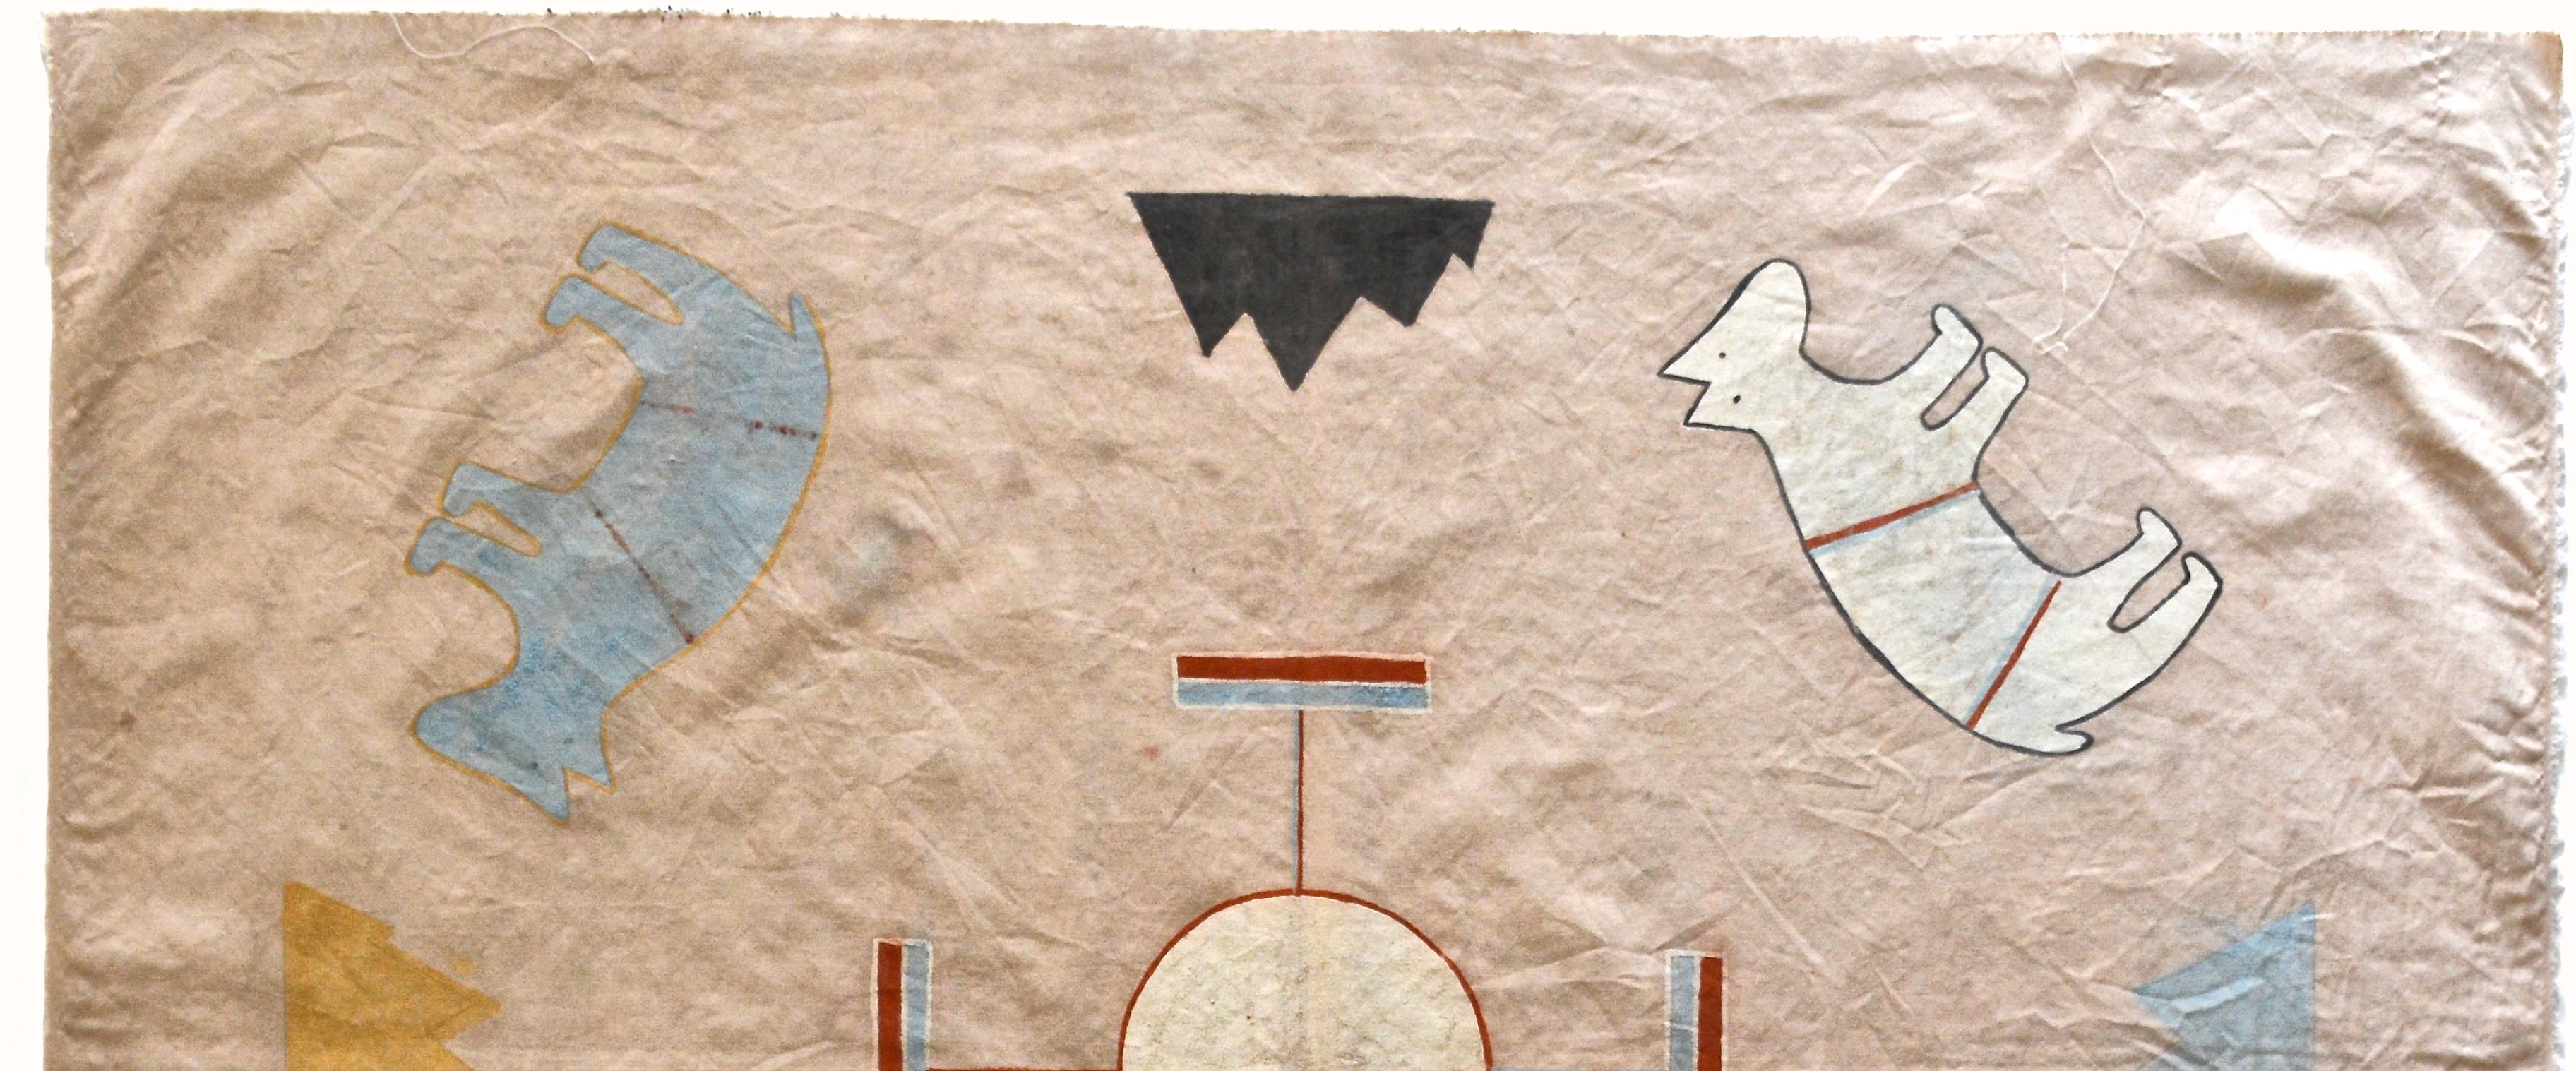 Unknown
Navajo Picture Writing on Muslin
Four Bears with Four Mountains in Colors of the Cardinal Directions
Muslin, mineral pigments, sand
Navajo Medicine Man active 1947 - 1970

To aid in recalling all the different paintings, a medicine man will